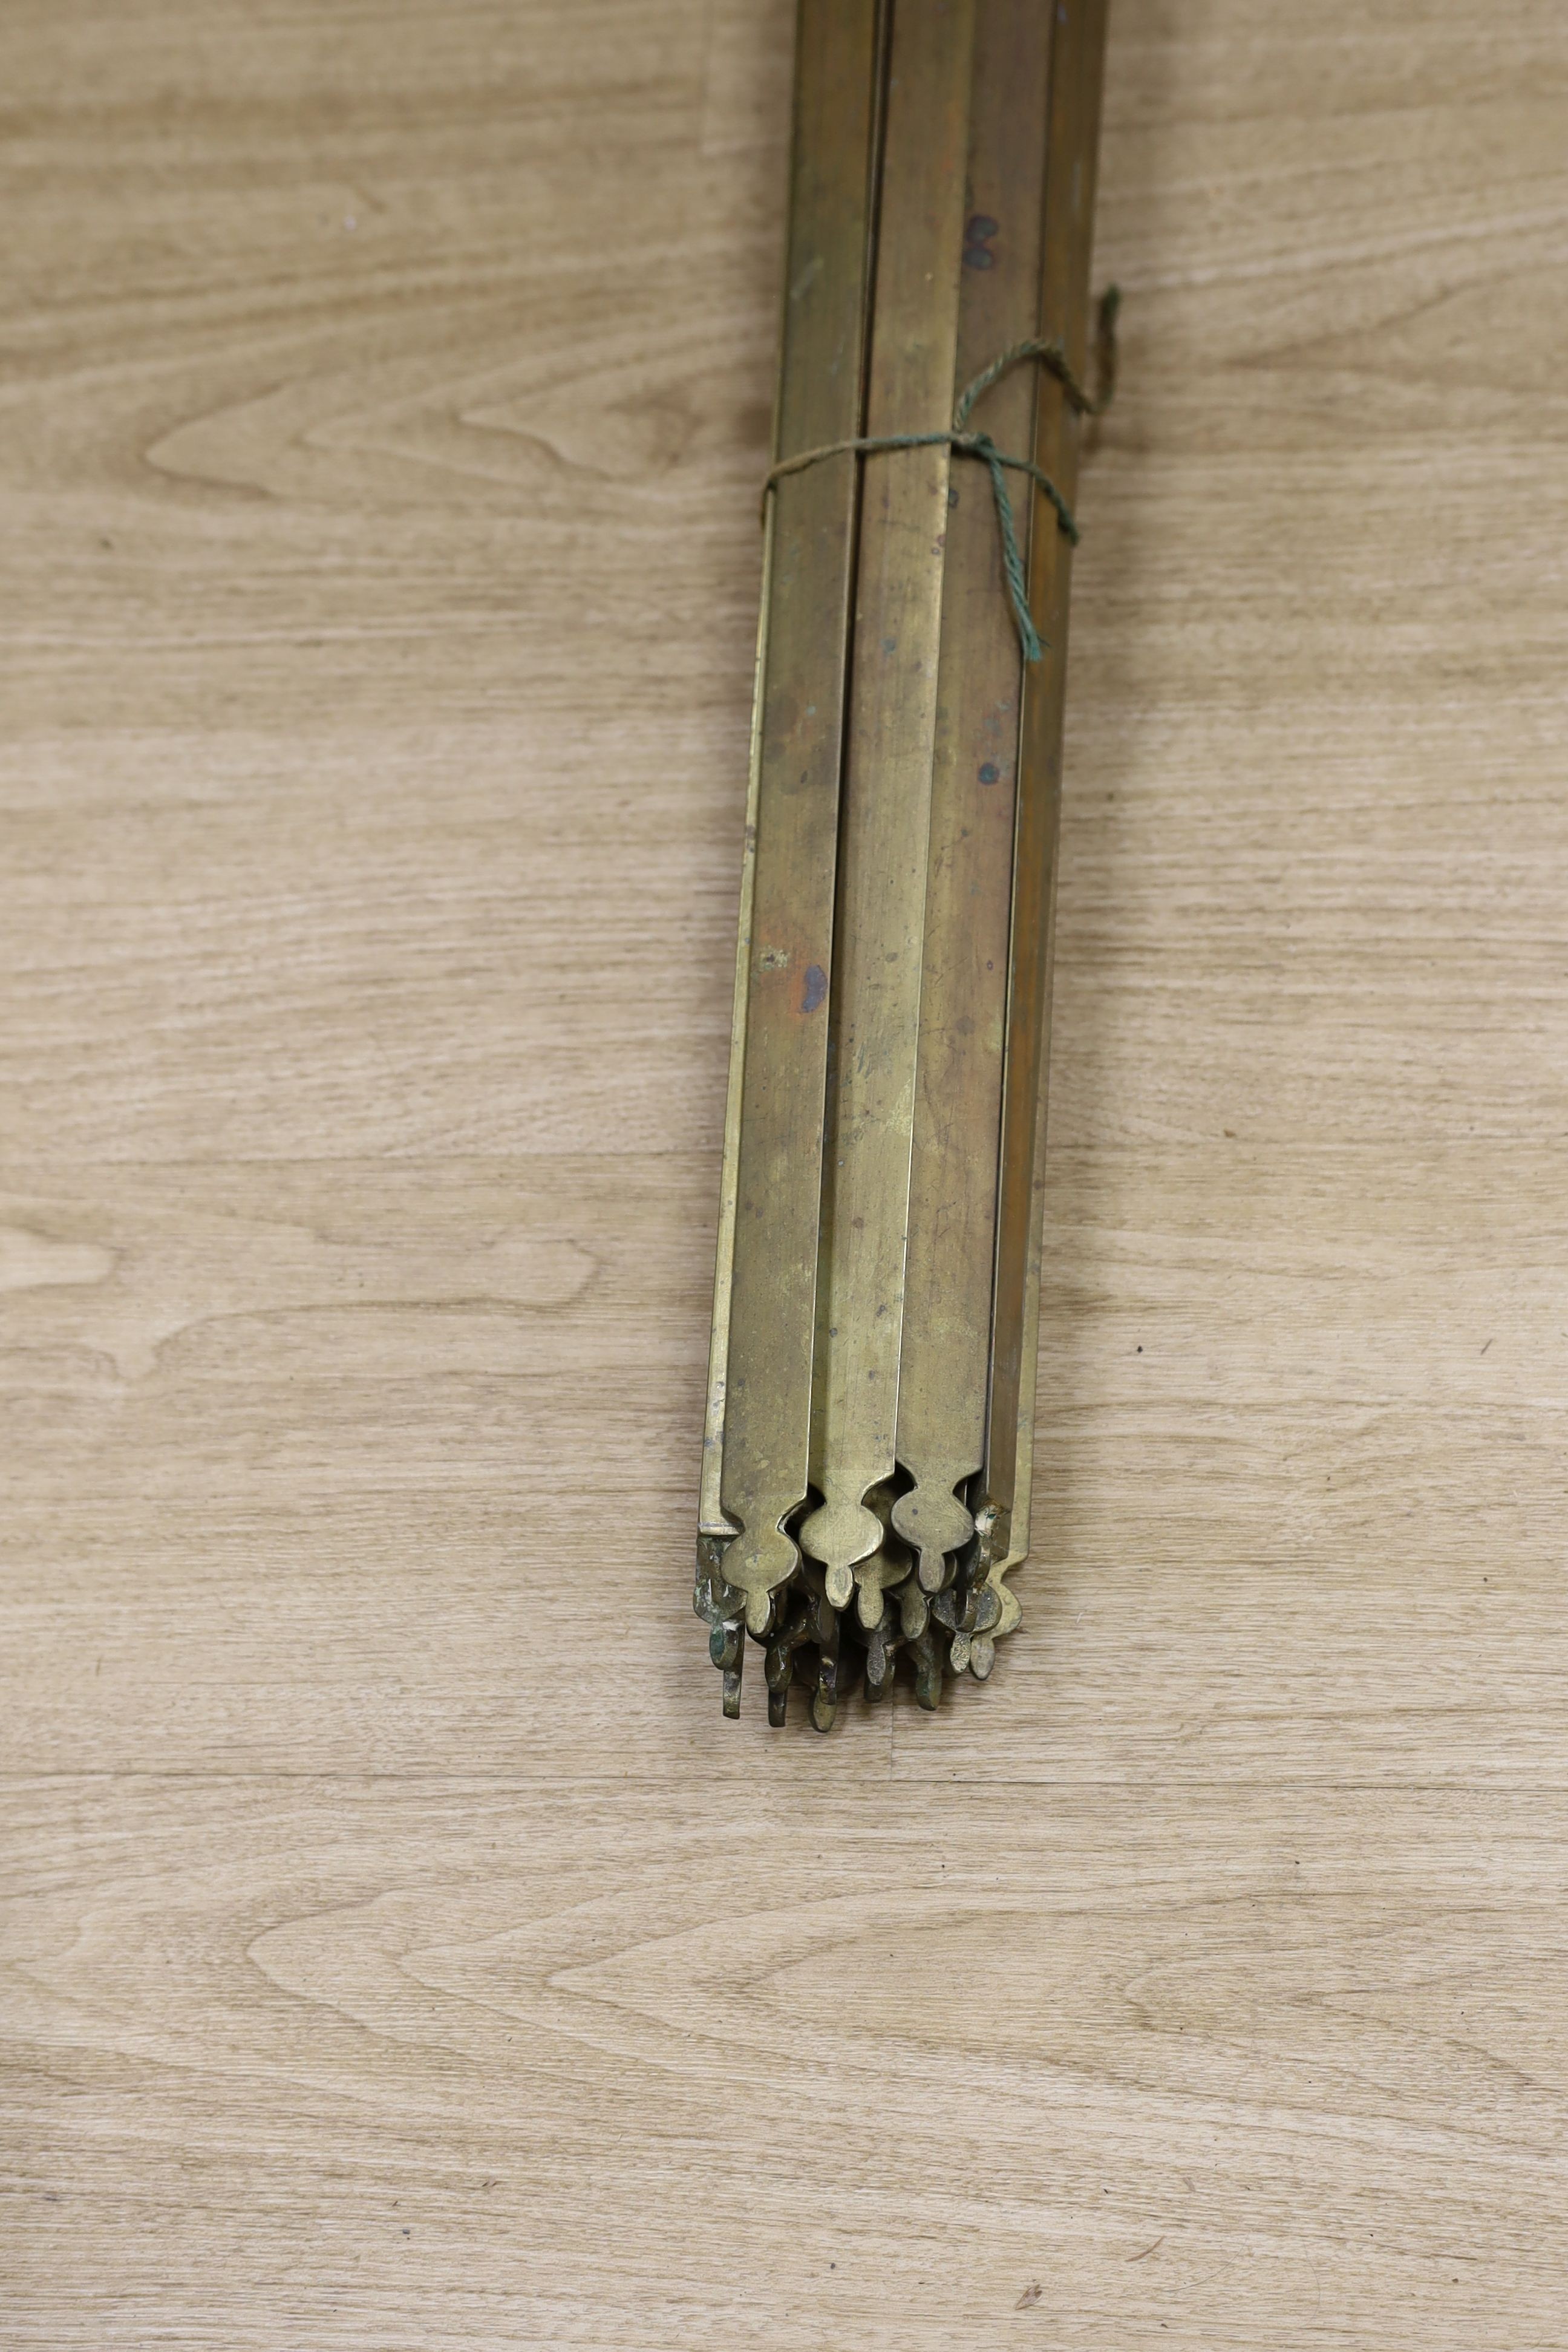 Two sets of brass stair rods with fittings.